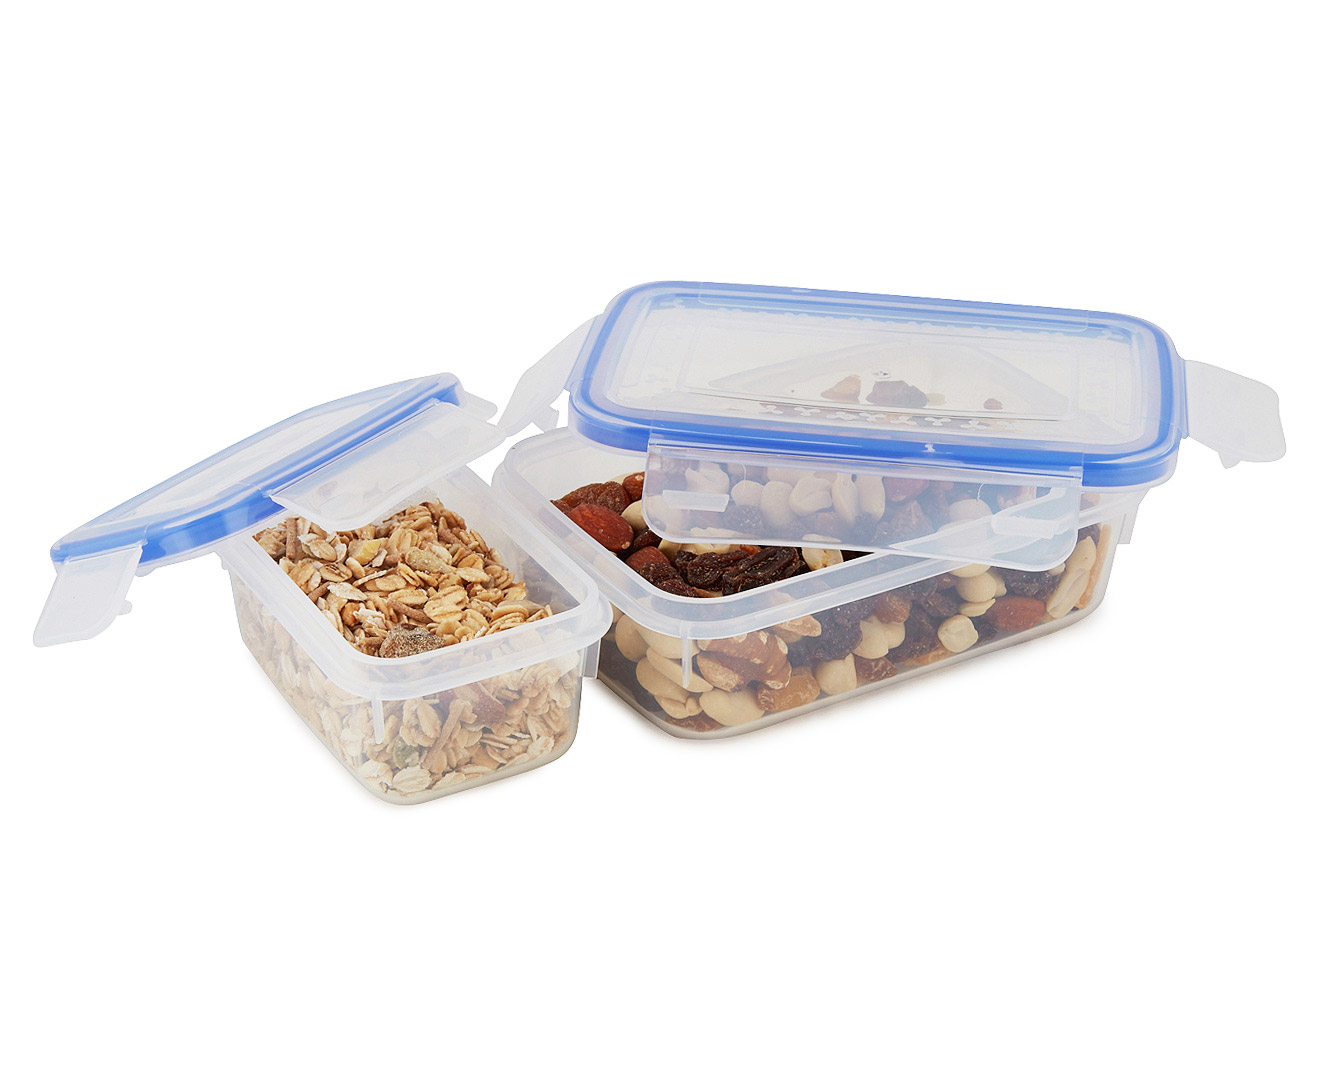 2 x Airtight Food Storage Containers 24 Piece Set - Blue ...